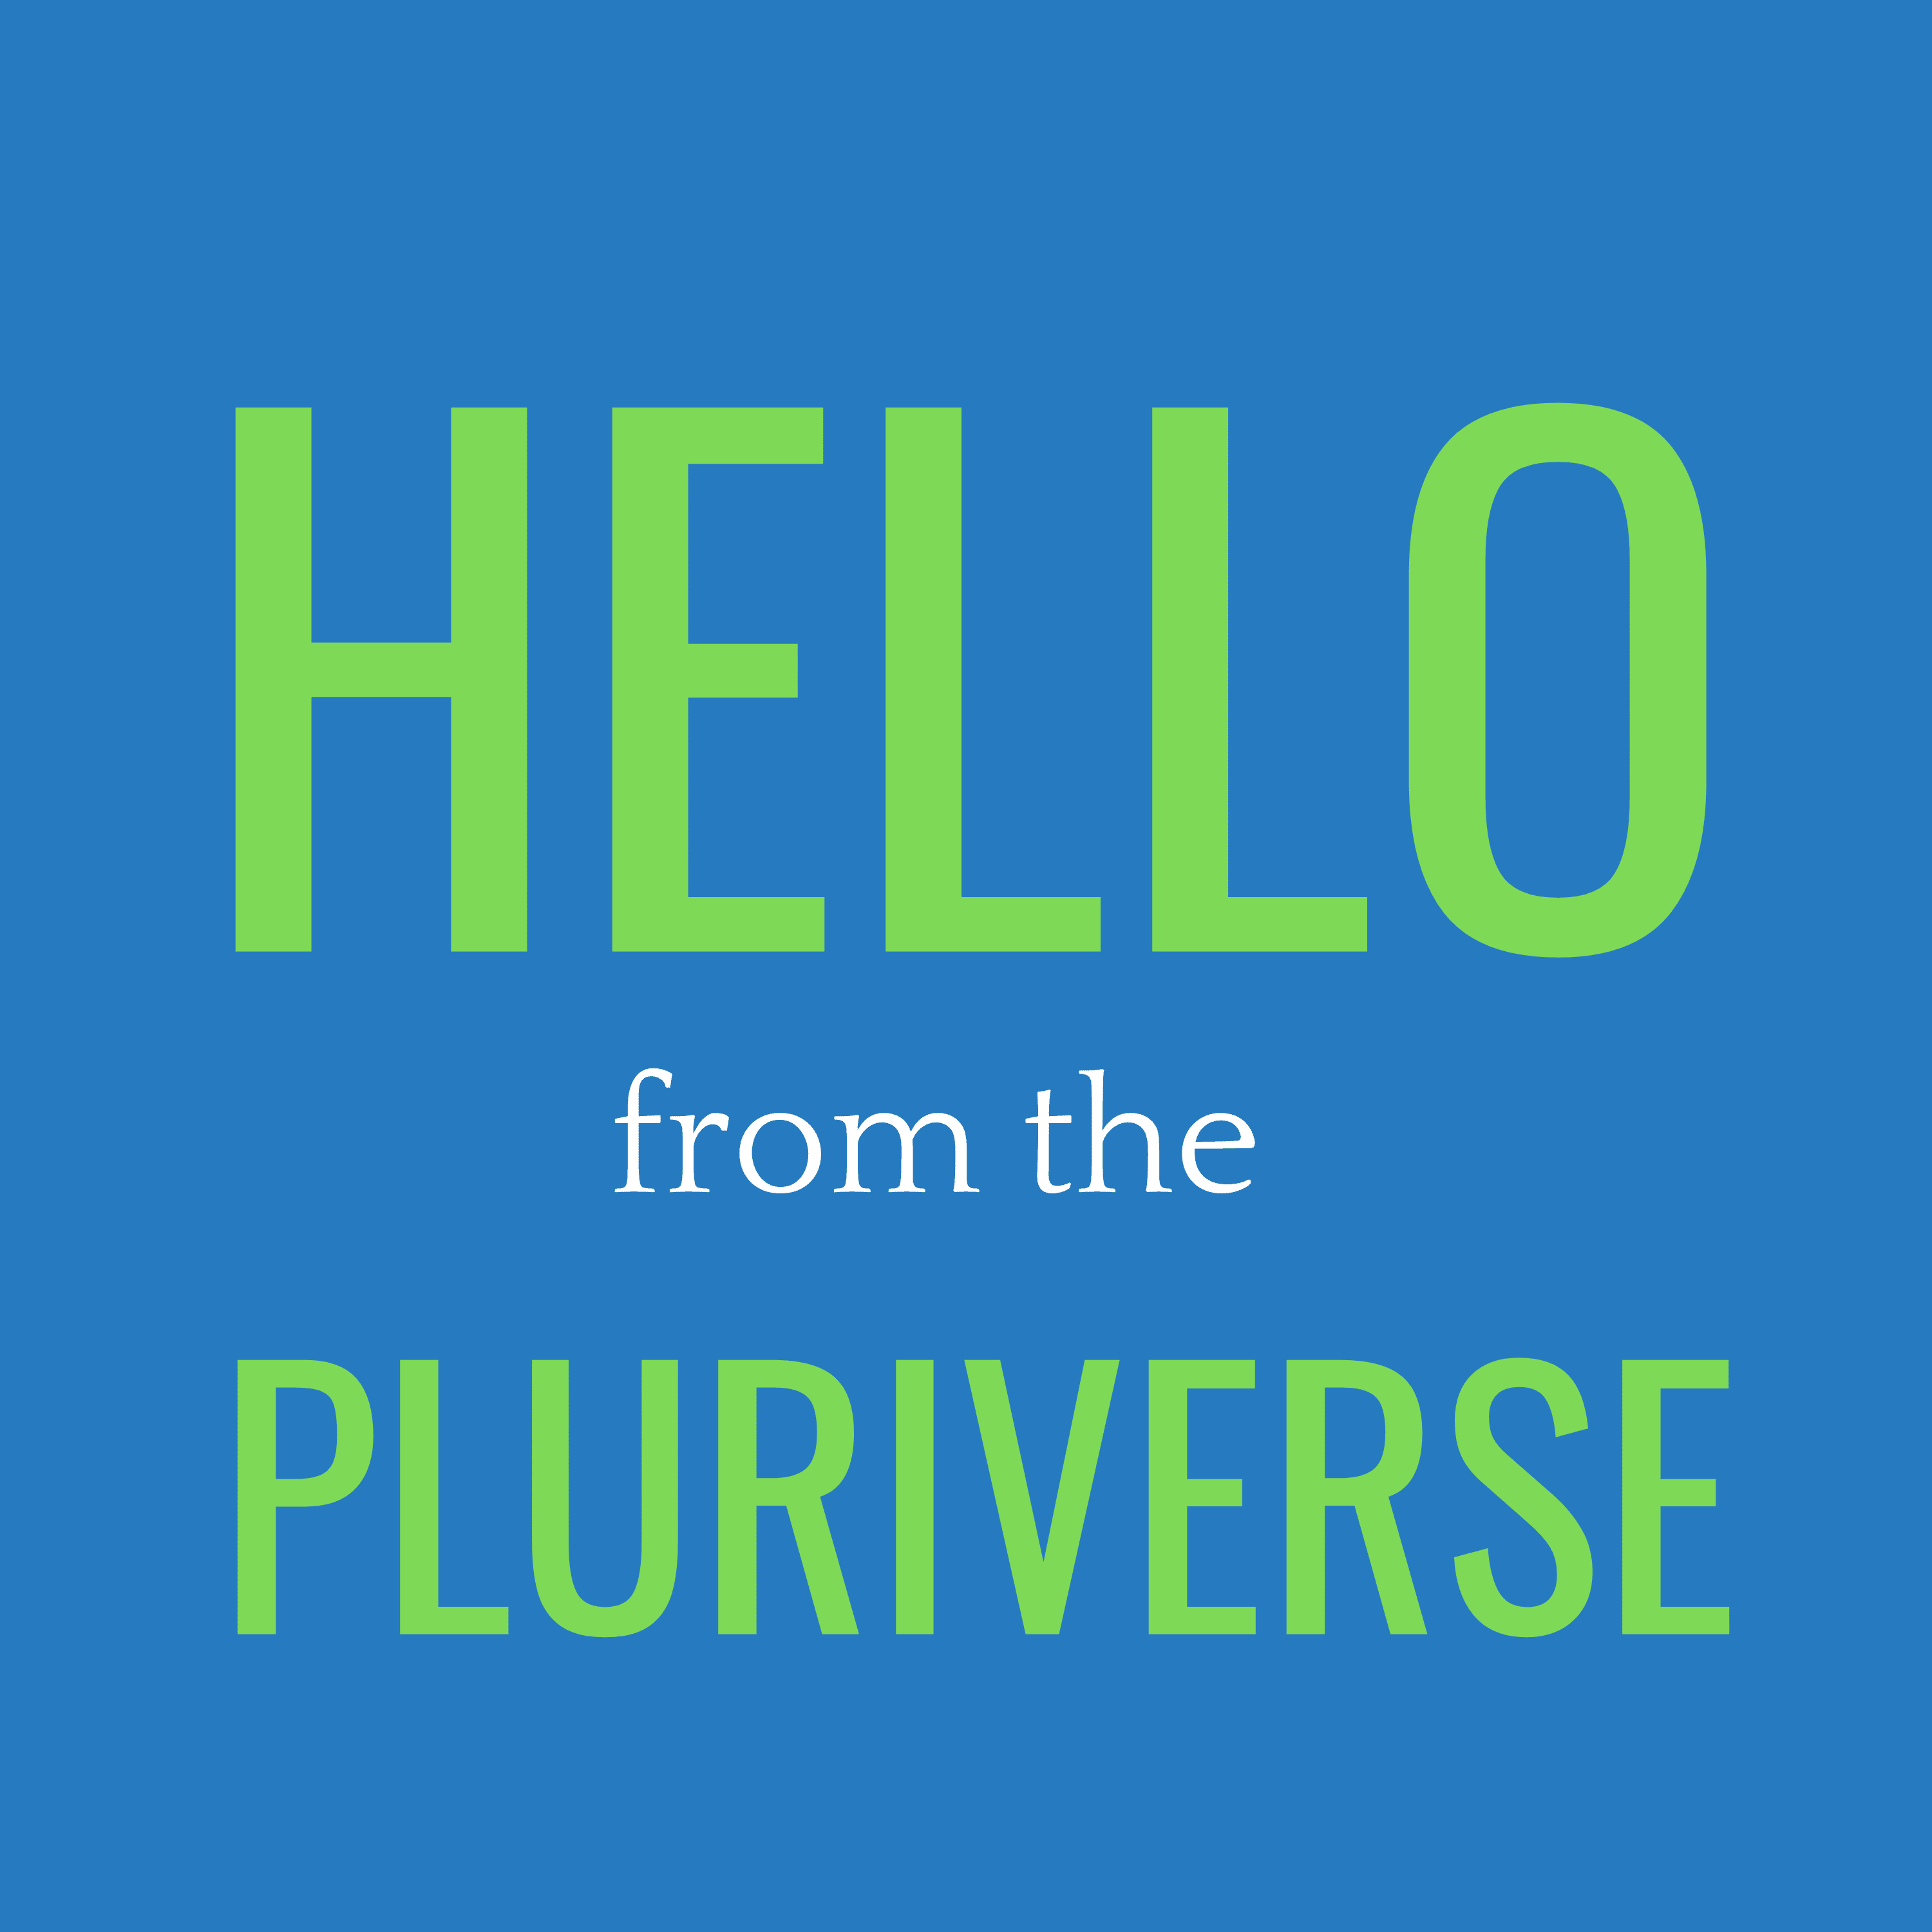 Logo with green text on a blue background: "Hello from the Pluriverse"